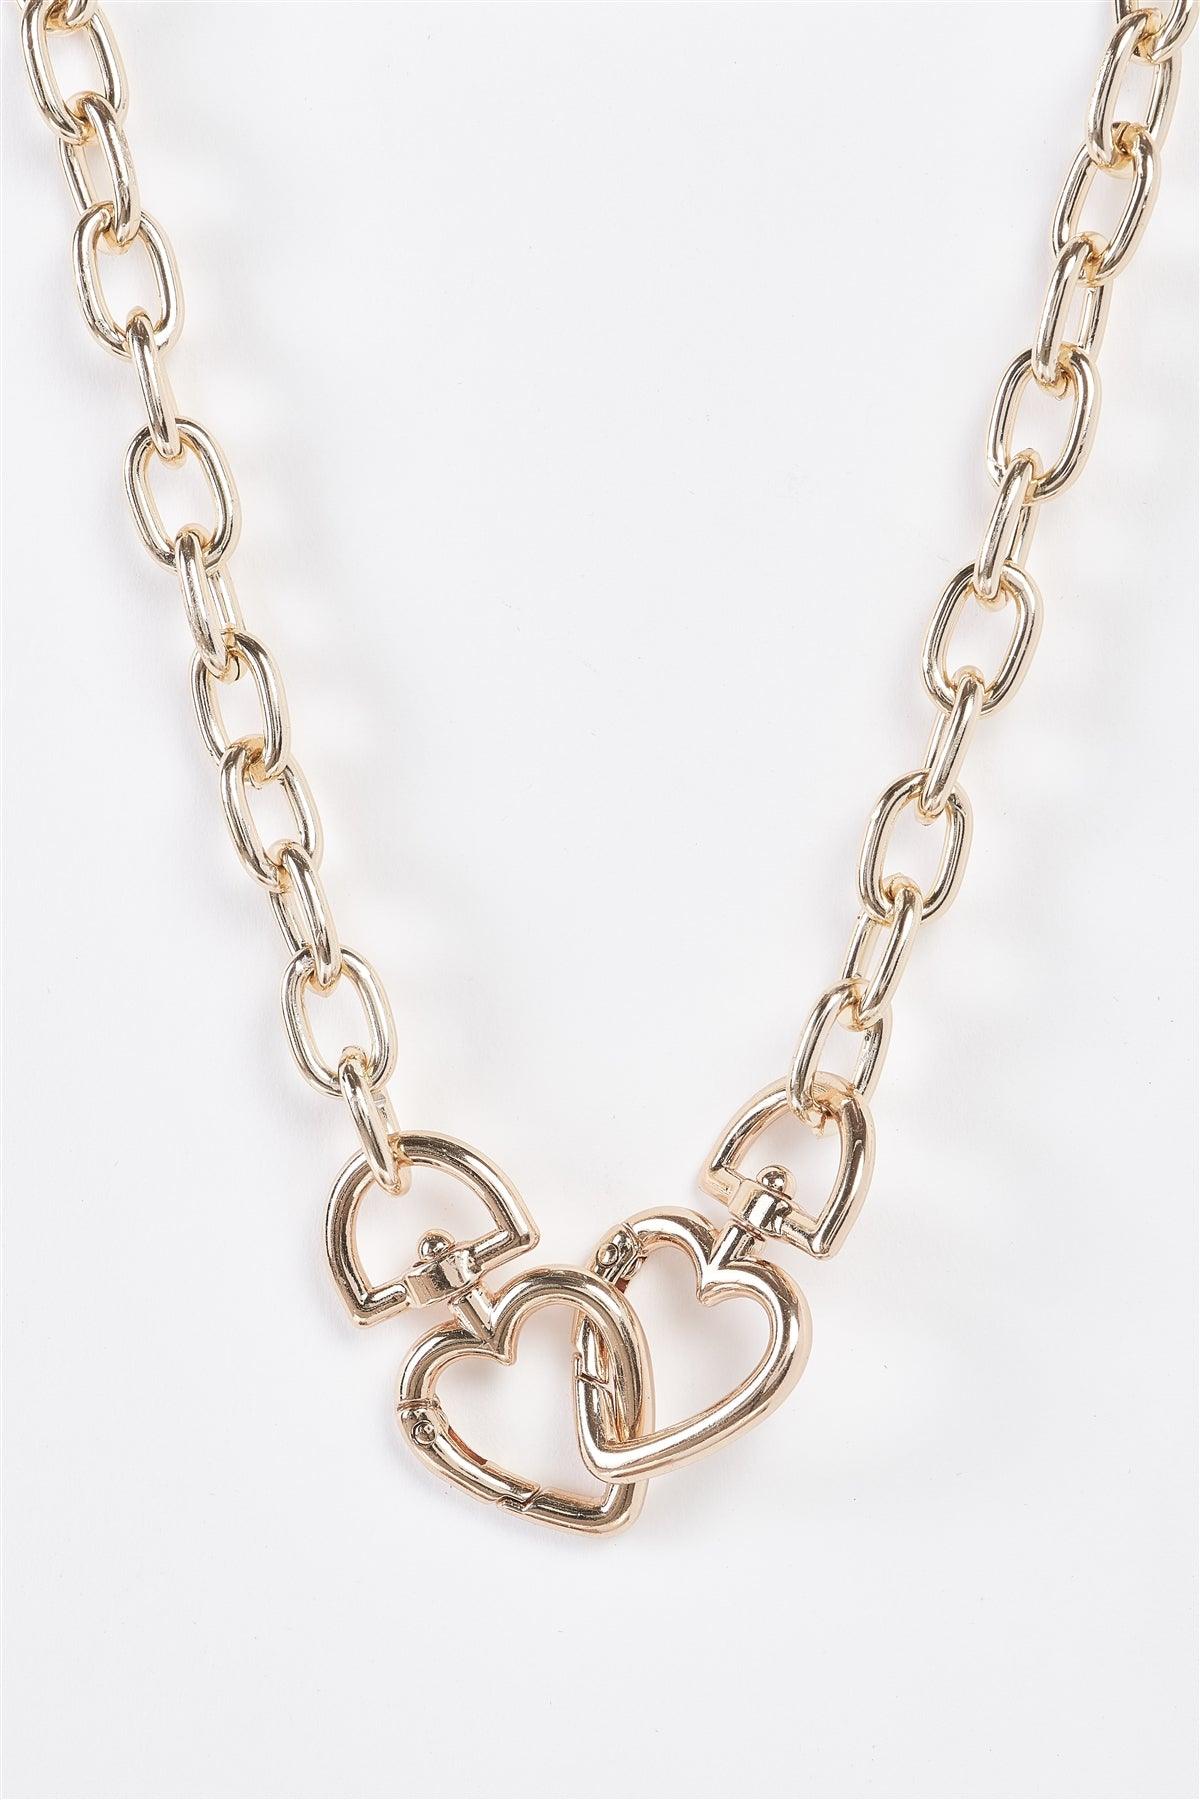 Locked Hearts Gold Link Chain Interlocked Hearts Charm Detail Short Necklace /3 Pieces